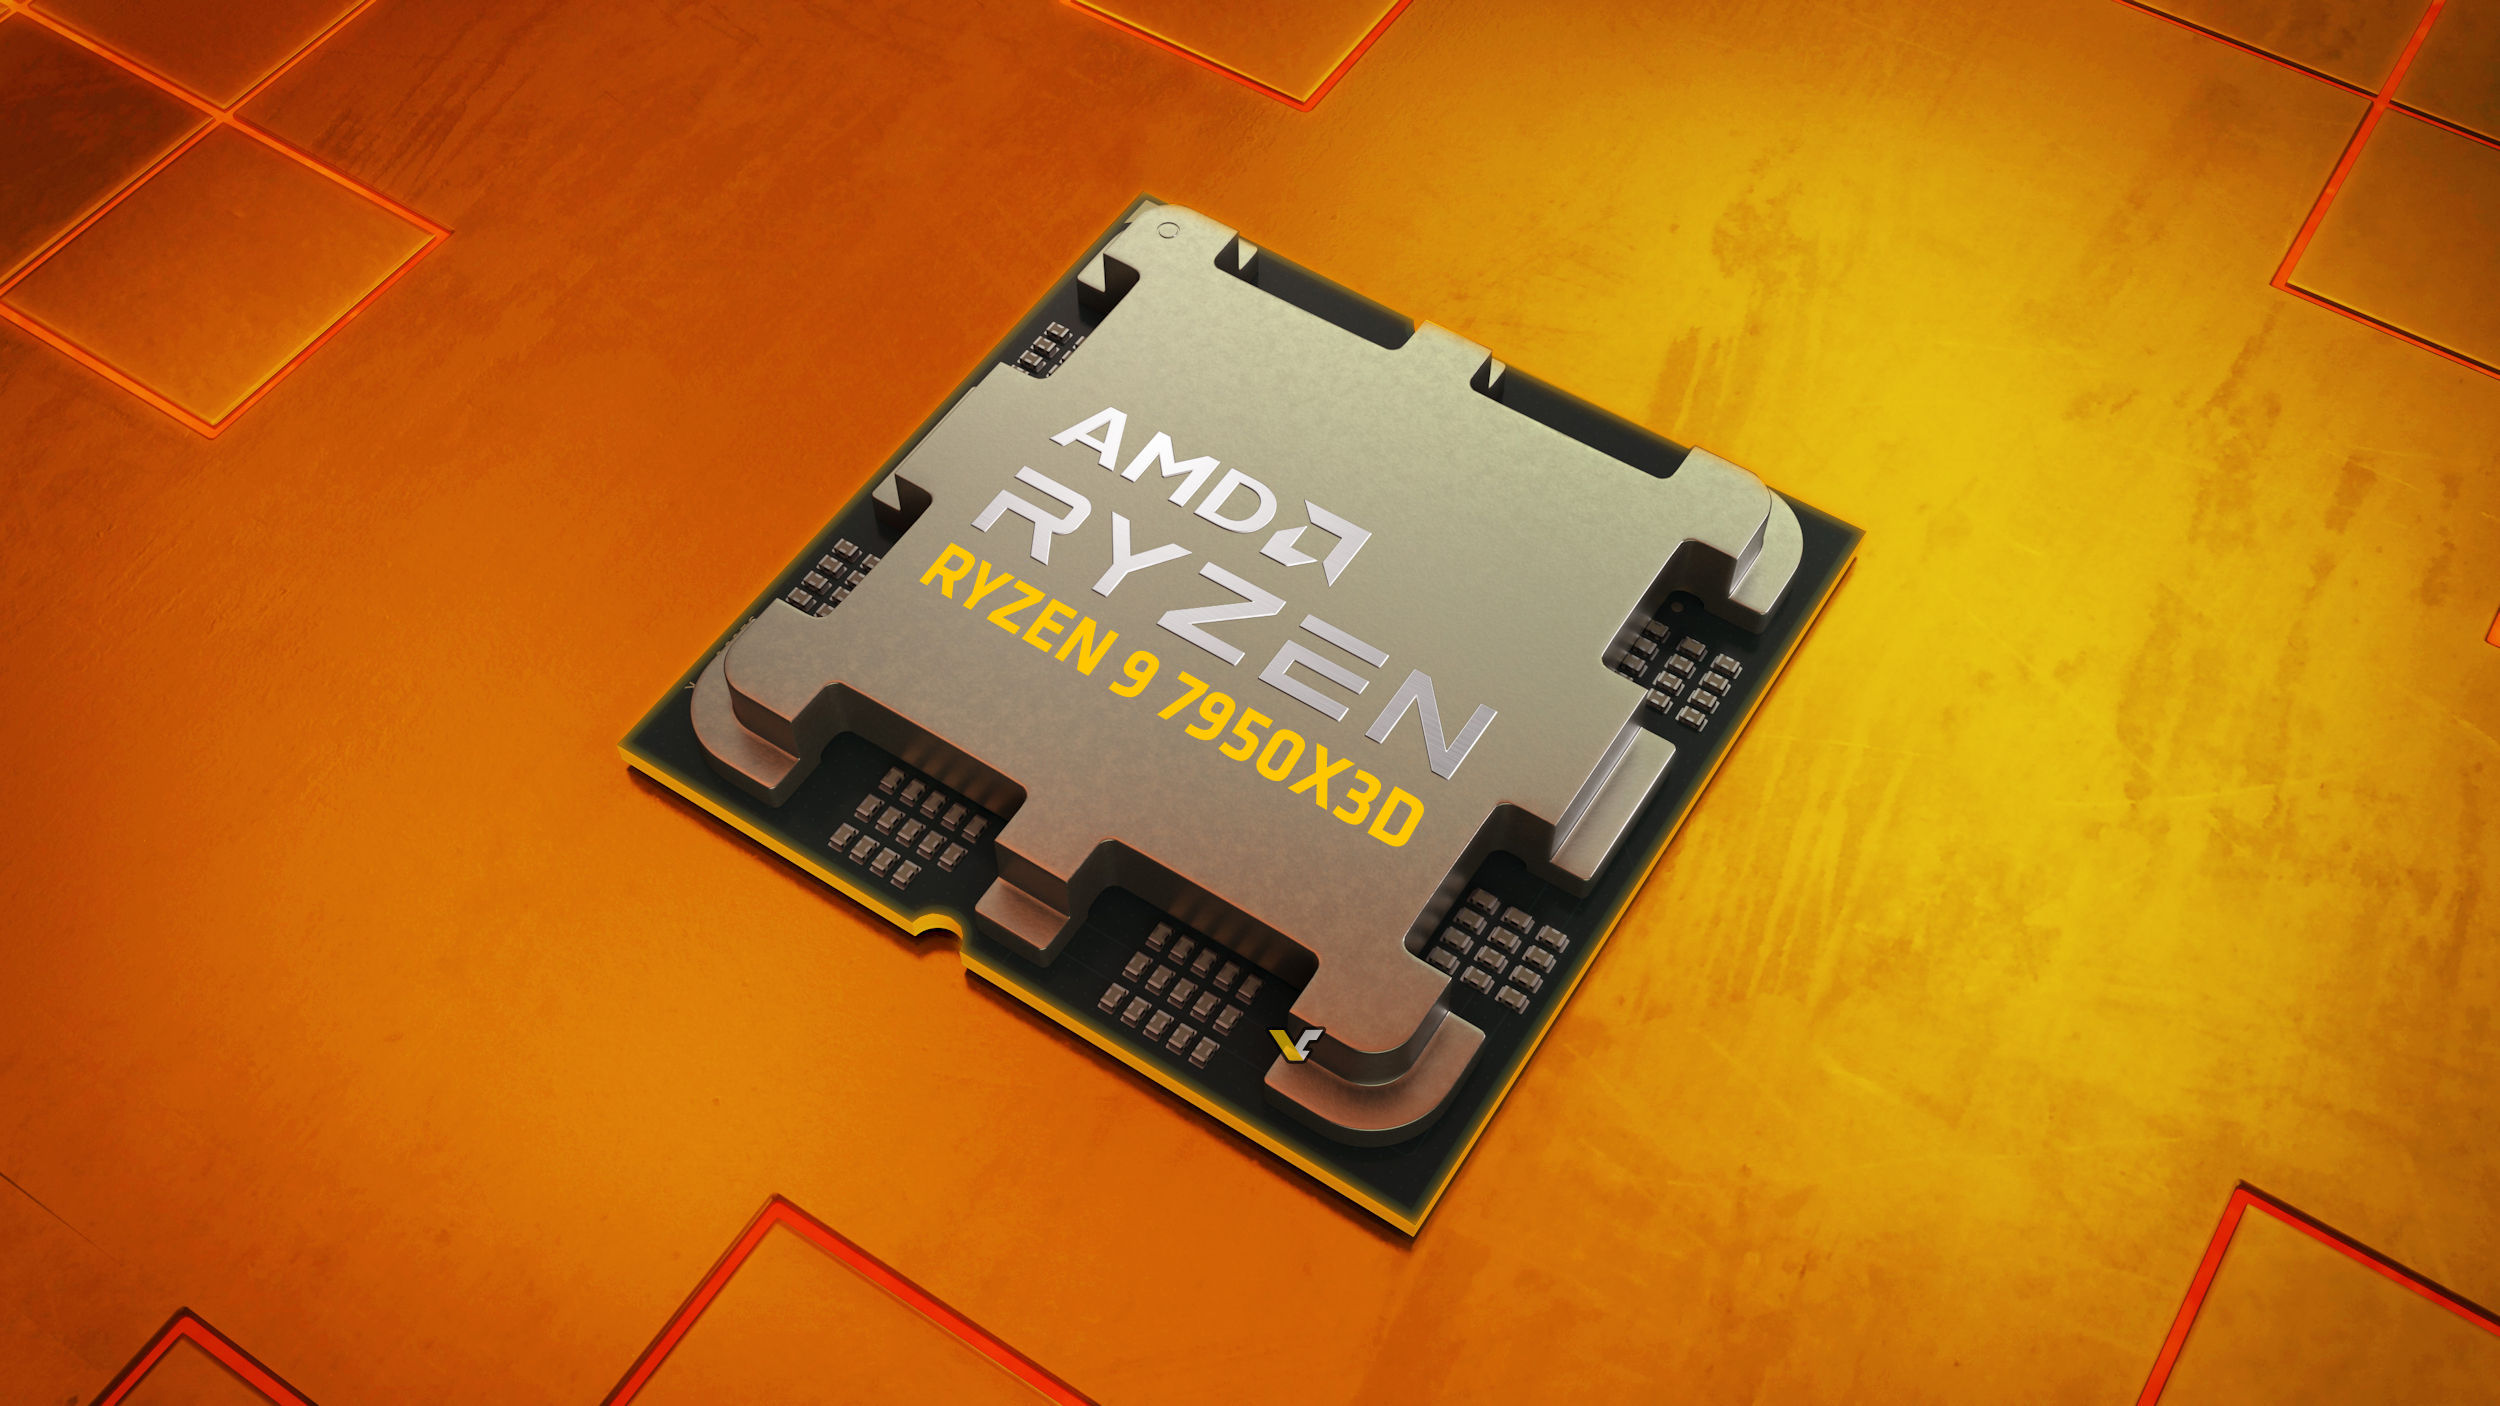 Ryzen 9 7950X3D review roundup - and overview - PC Guide